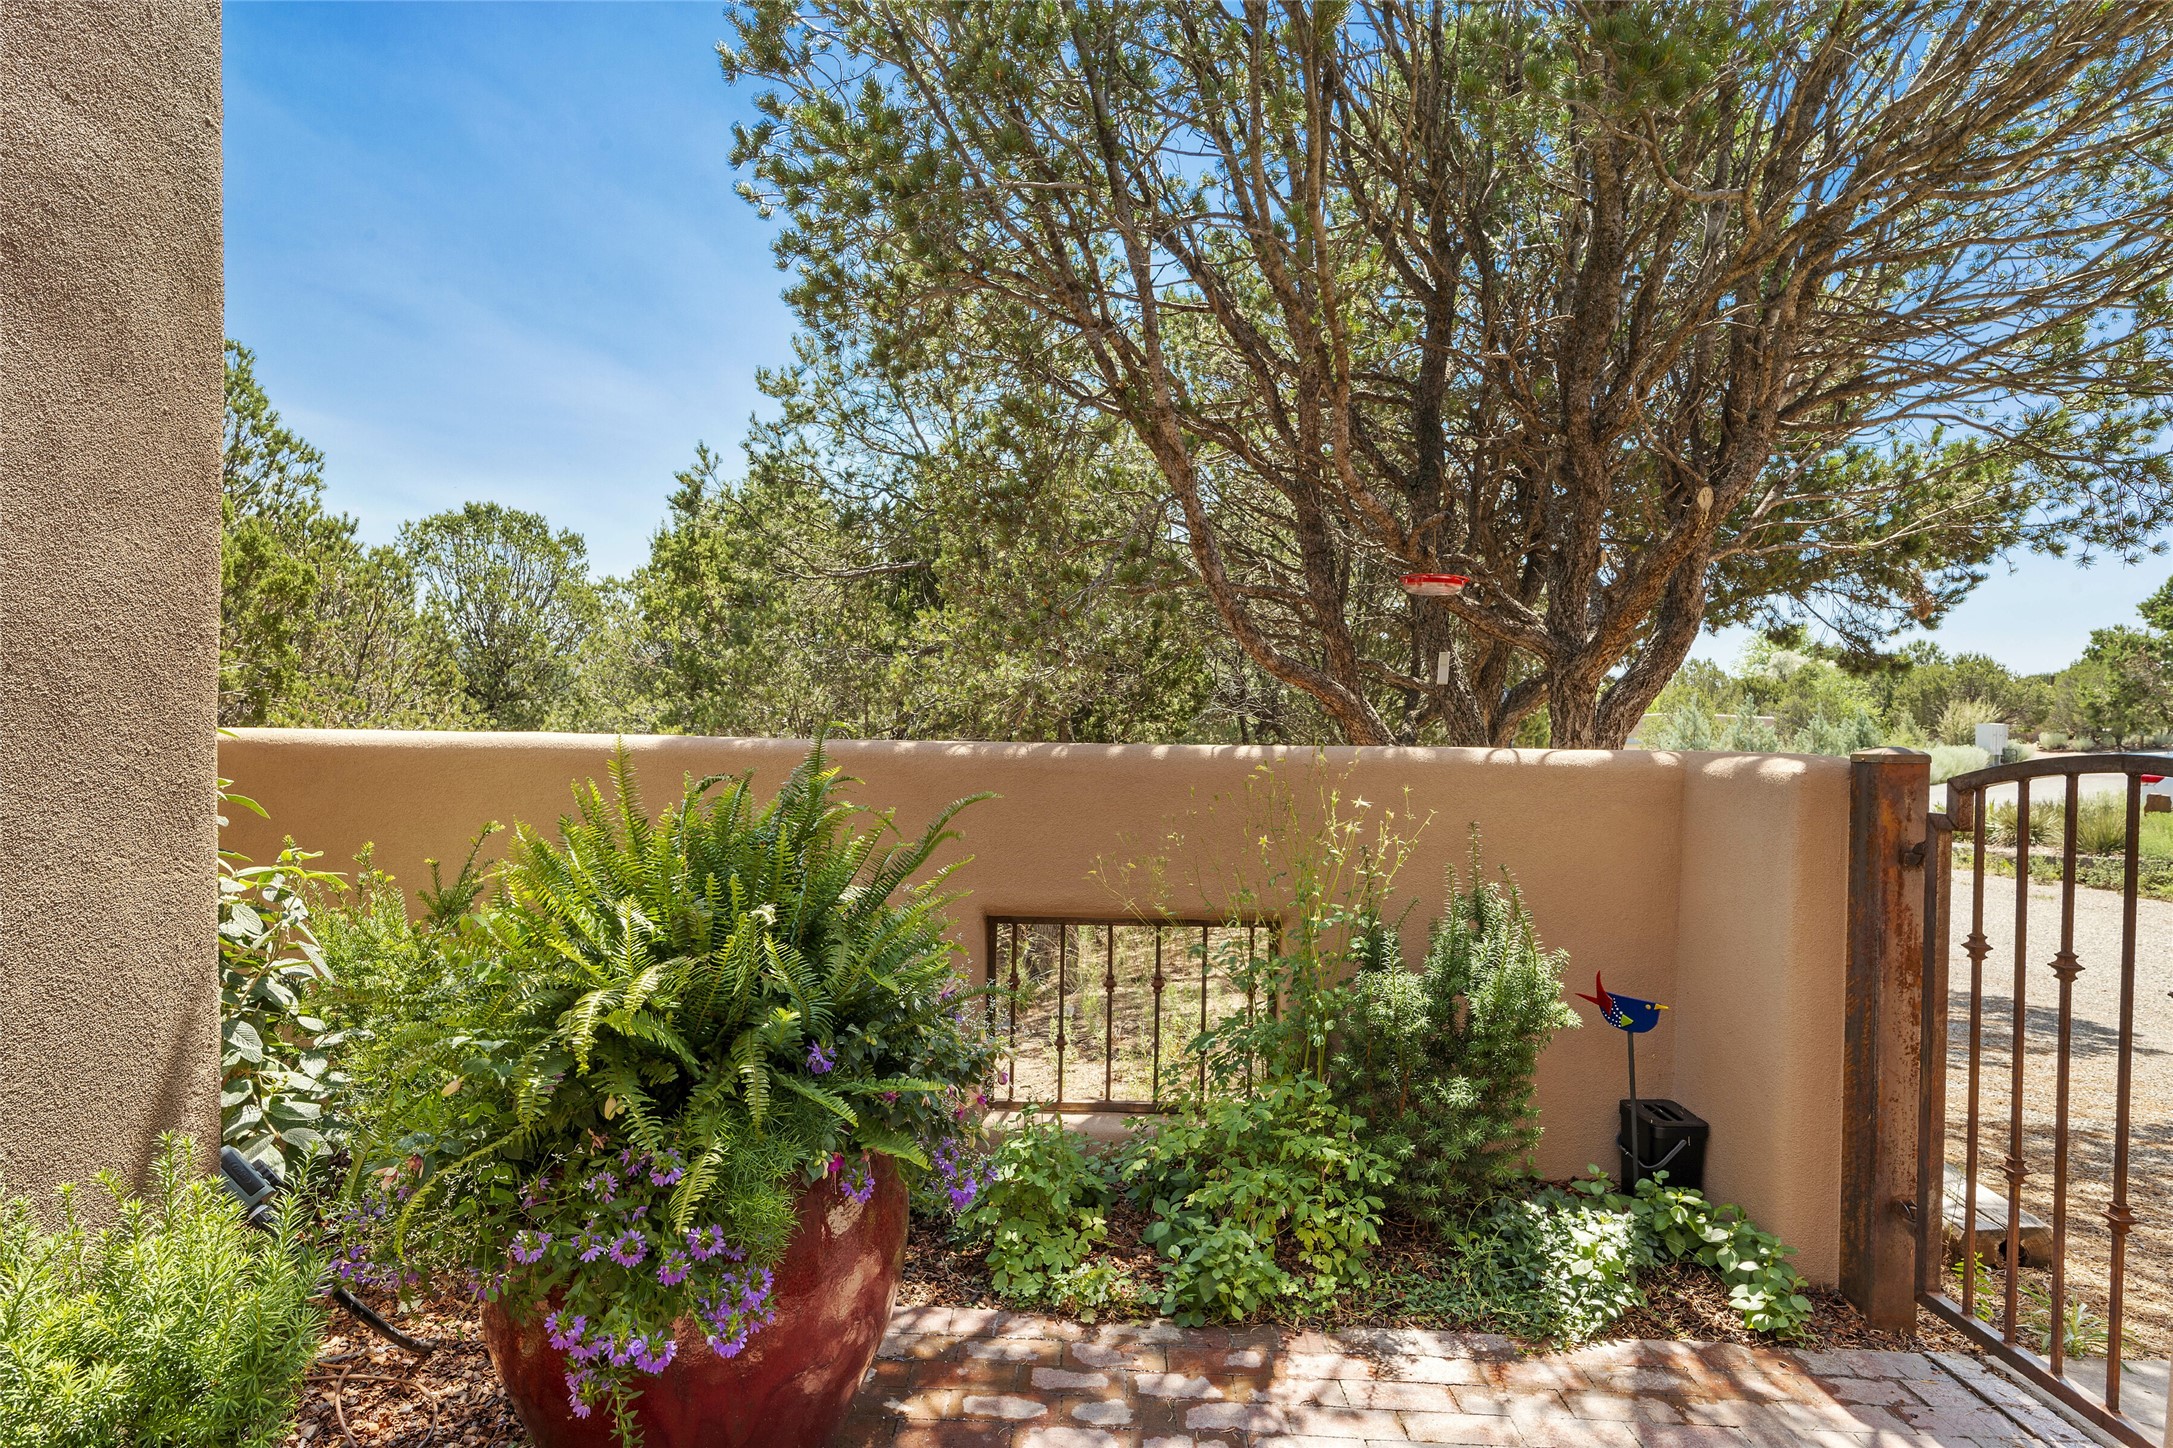 385 Calle Colina, Santa Fe, New Mexico 87501, 2 Bedrooms Bedrooms, ,2 BathroomsBathrooms,Residential,For Sale,385 Calle Colina,202400358